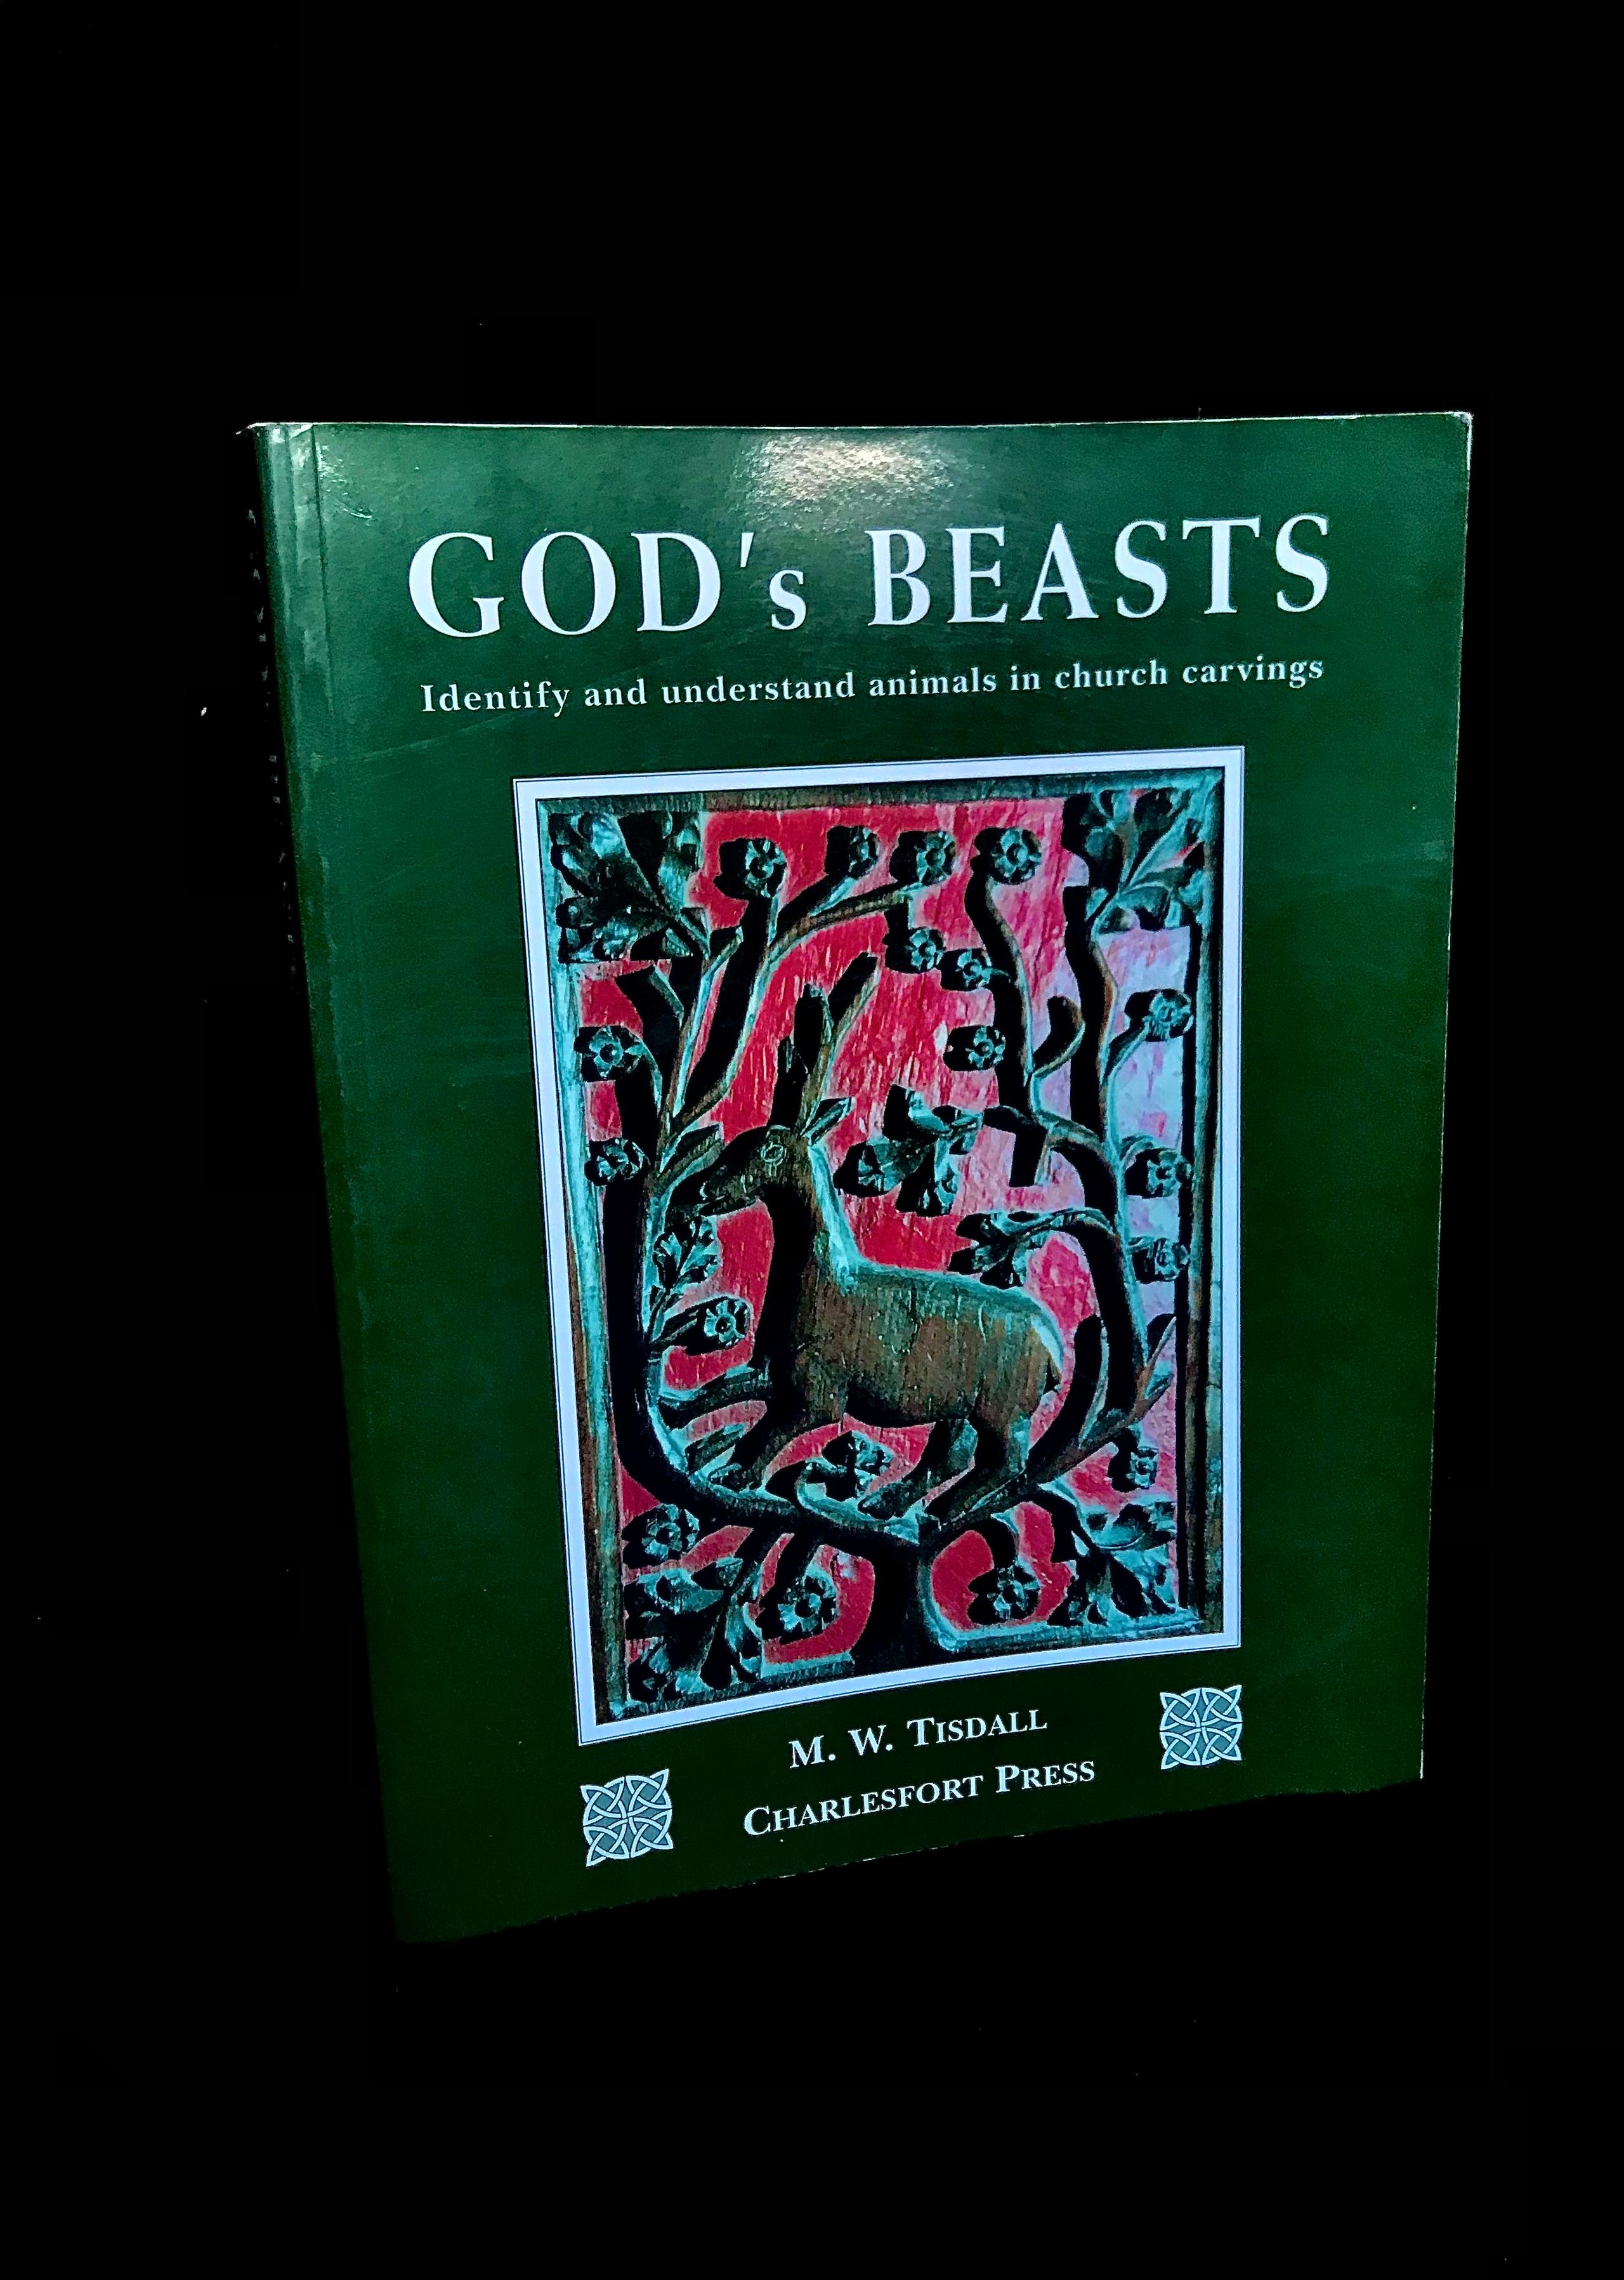 God's Beasts: Identify & Understand Animals In Church Carvings by M. W. Tisdall Signed Copy